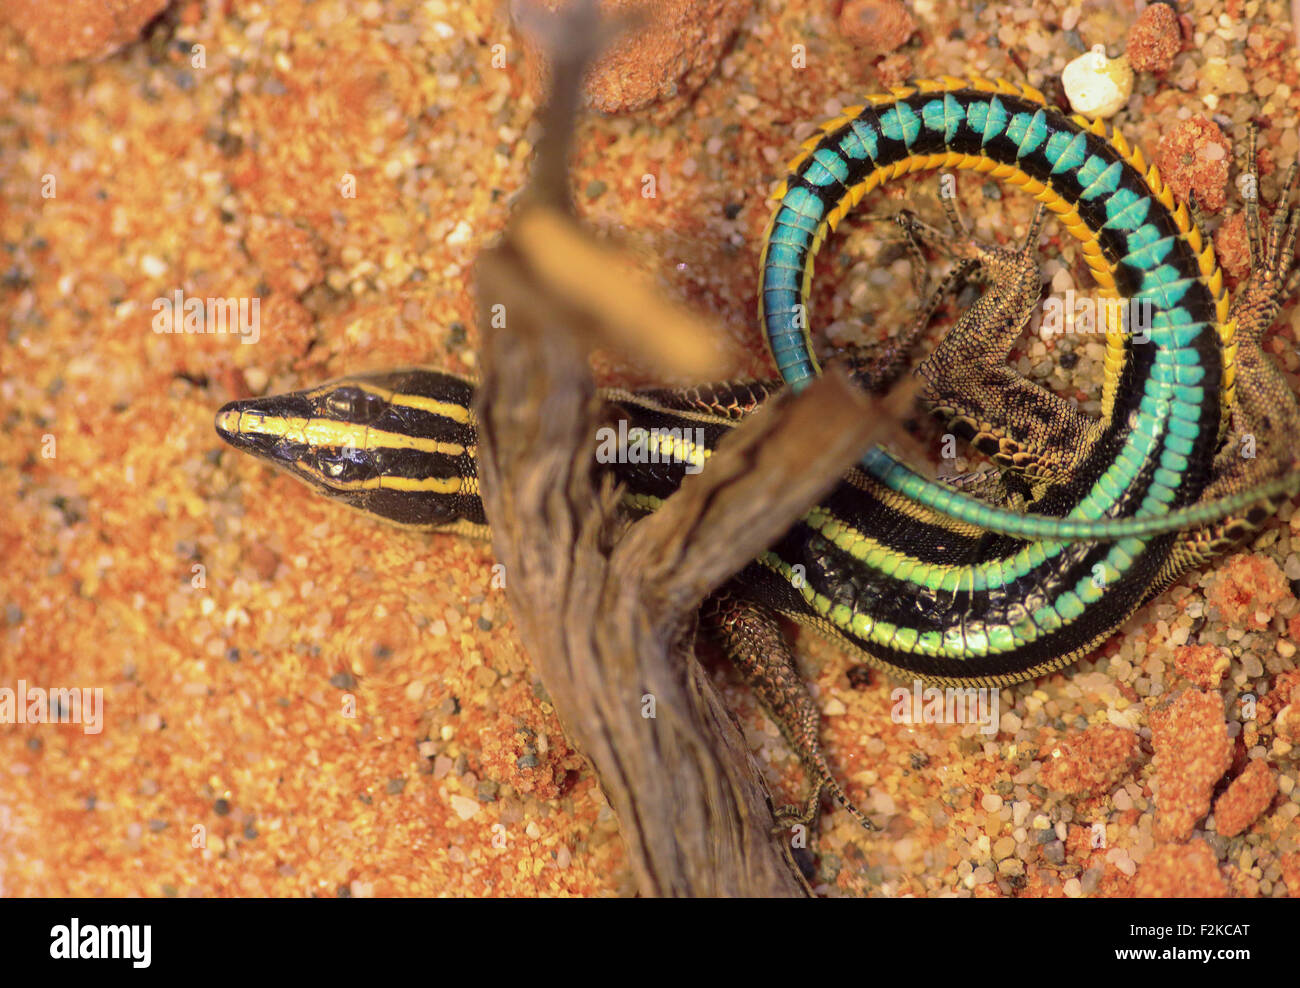 A Blue-tailed skink, Cryptoblepharus egeriae, hidden under a branch on the sand Stock Photo